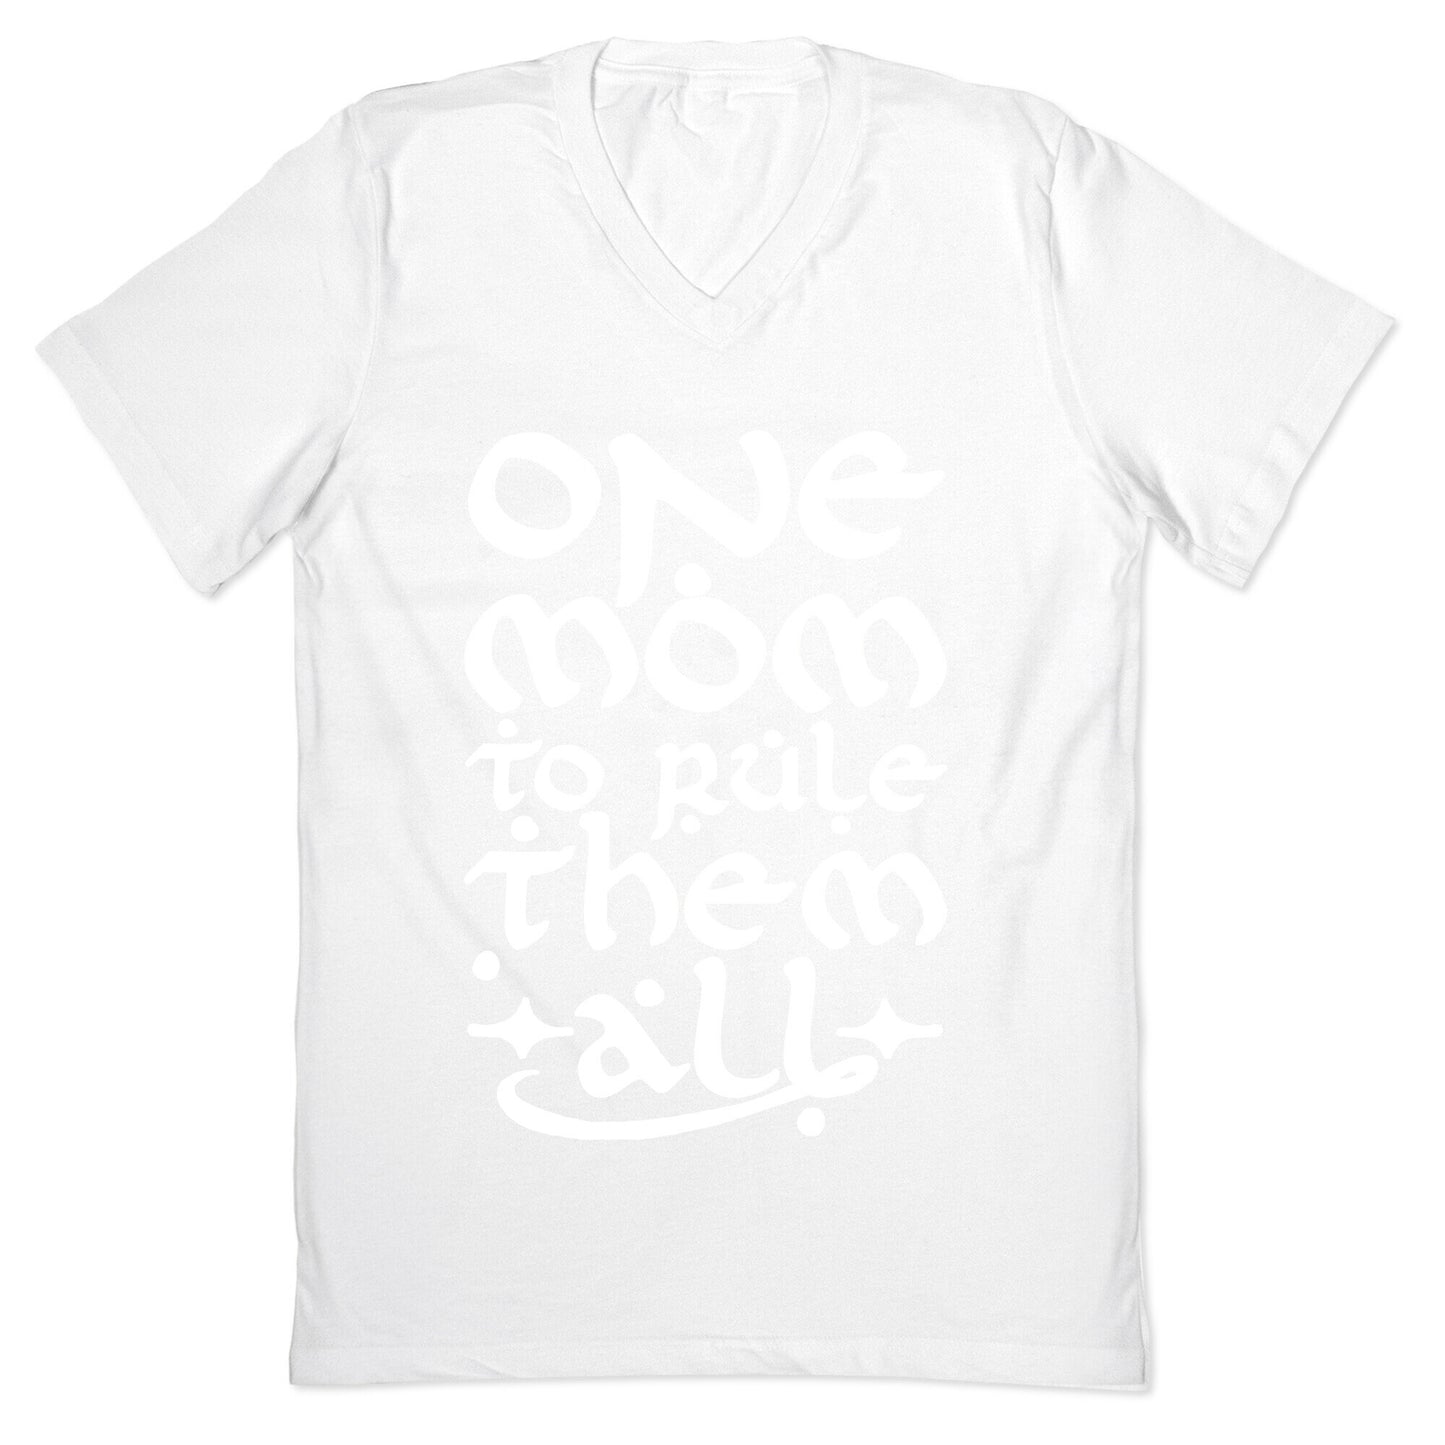 One Mom To Rule Them All V-Neck